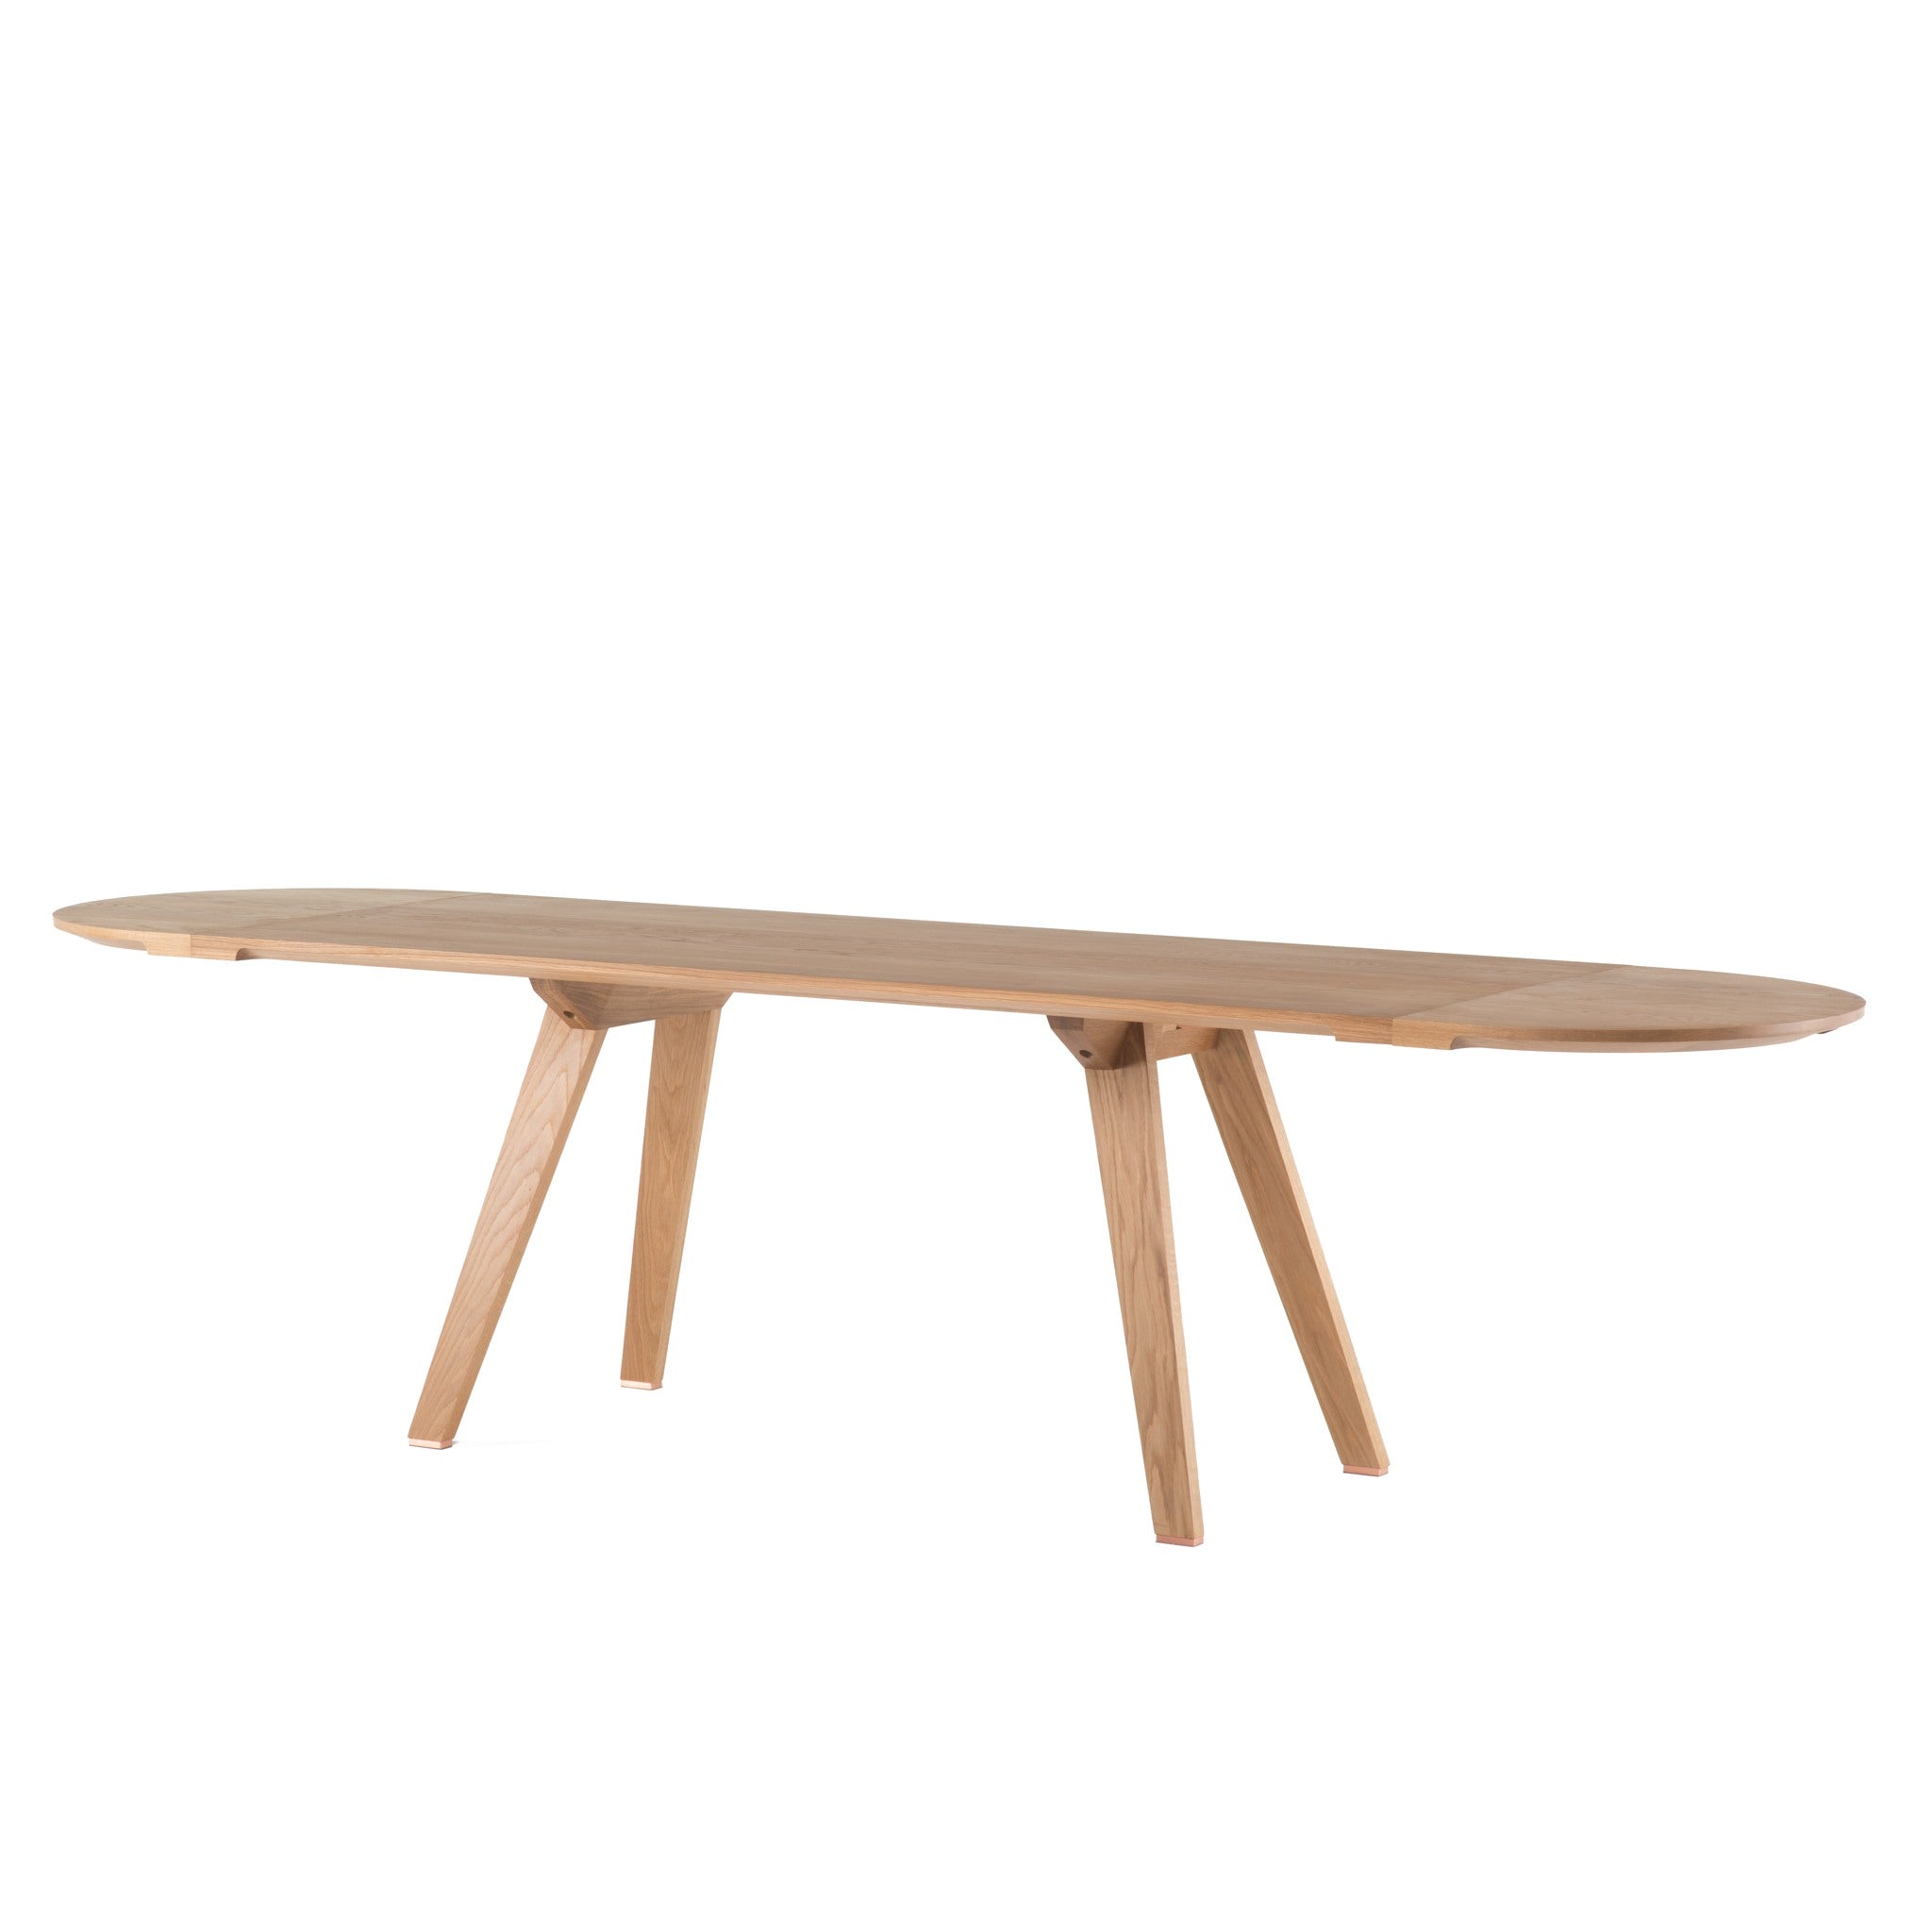 Clearance Together Extending Table / Medium / Wide / White Oiled Oak by Ilse Crawford